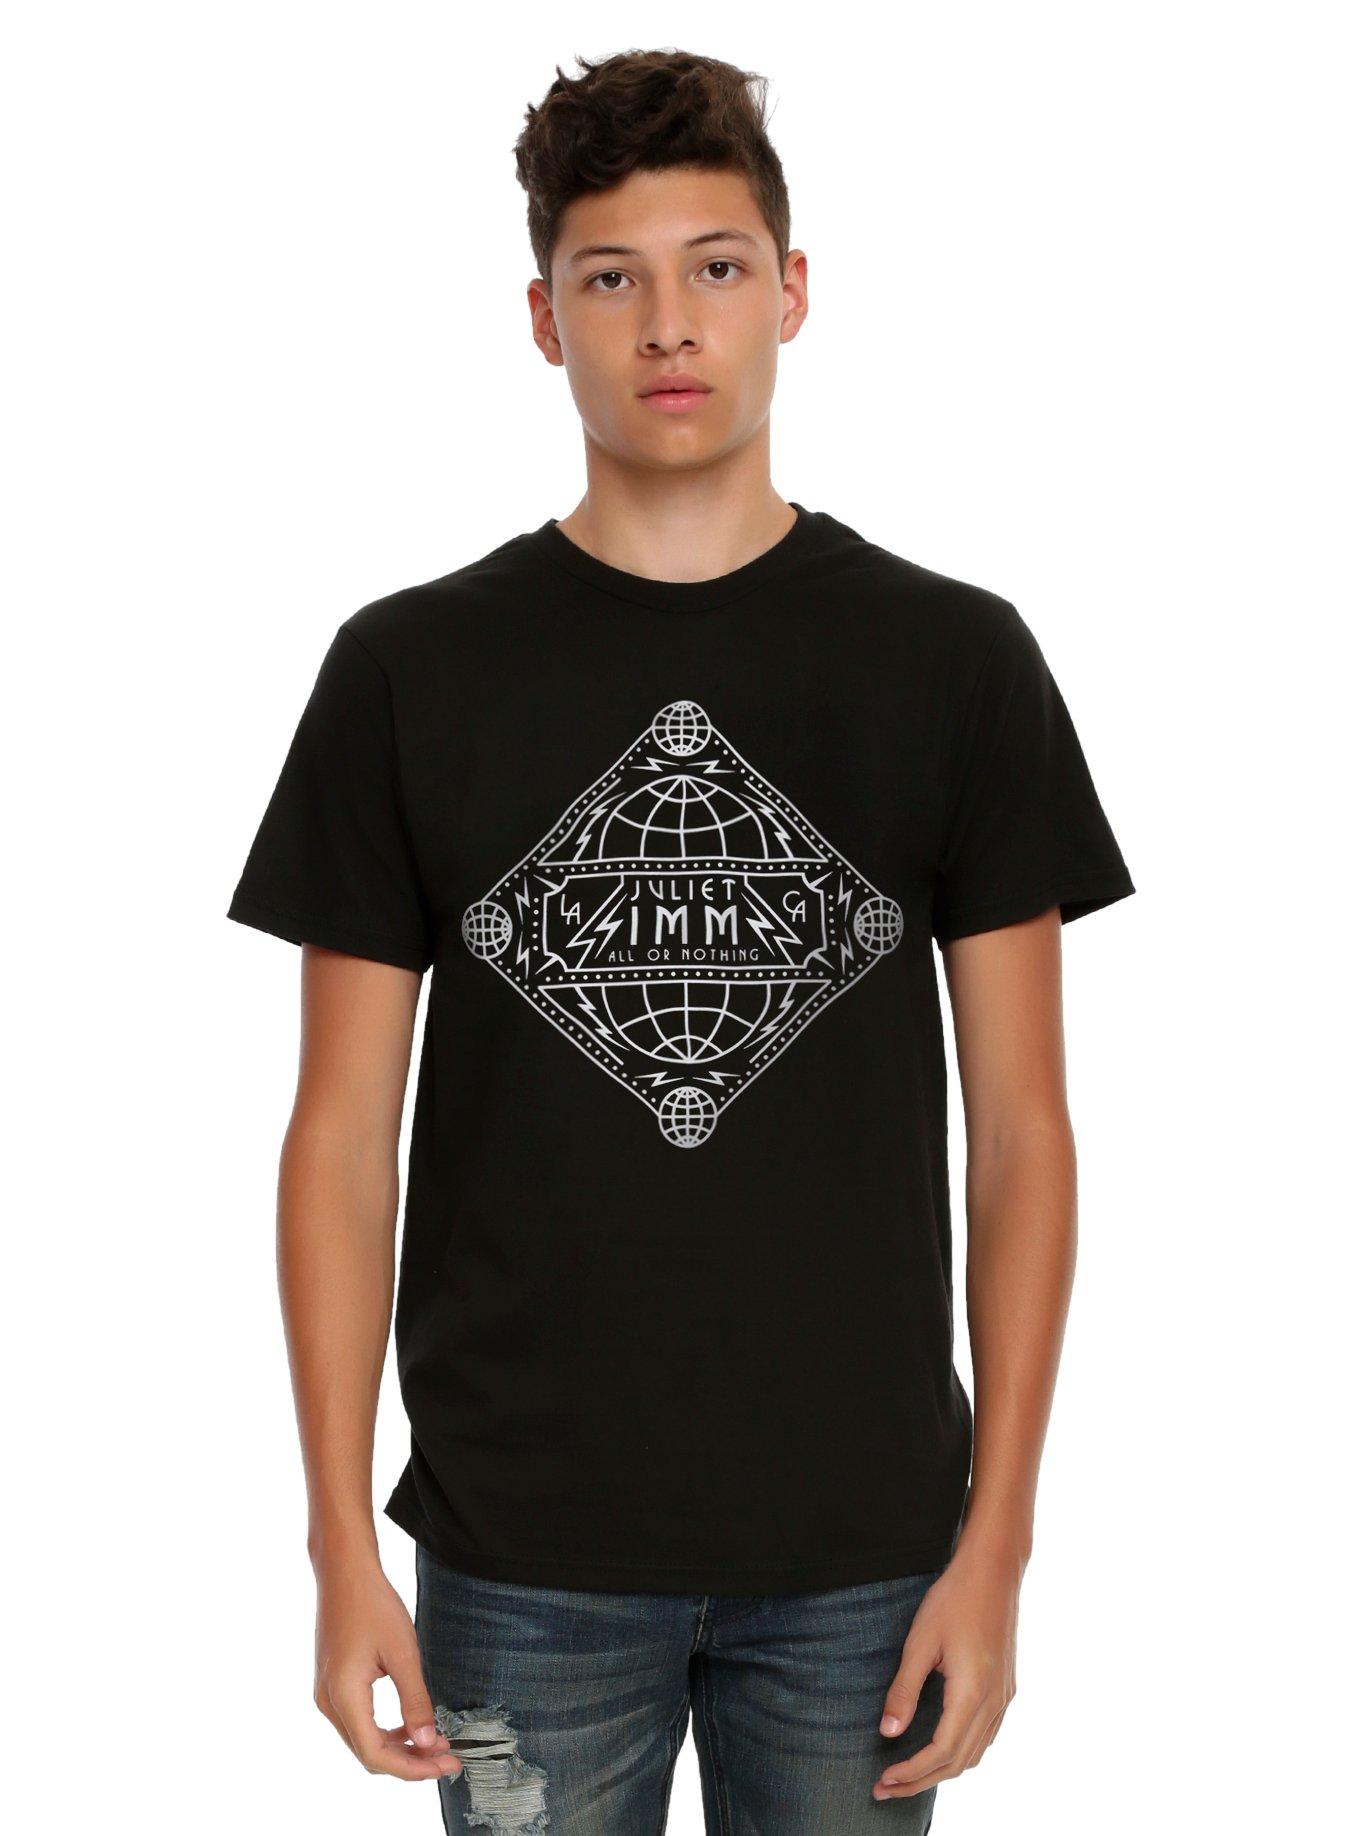 Juliet Simms All Or Nothing T-Shirt | Hot Topic